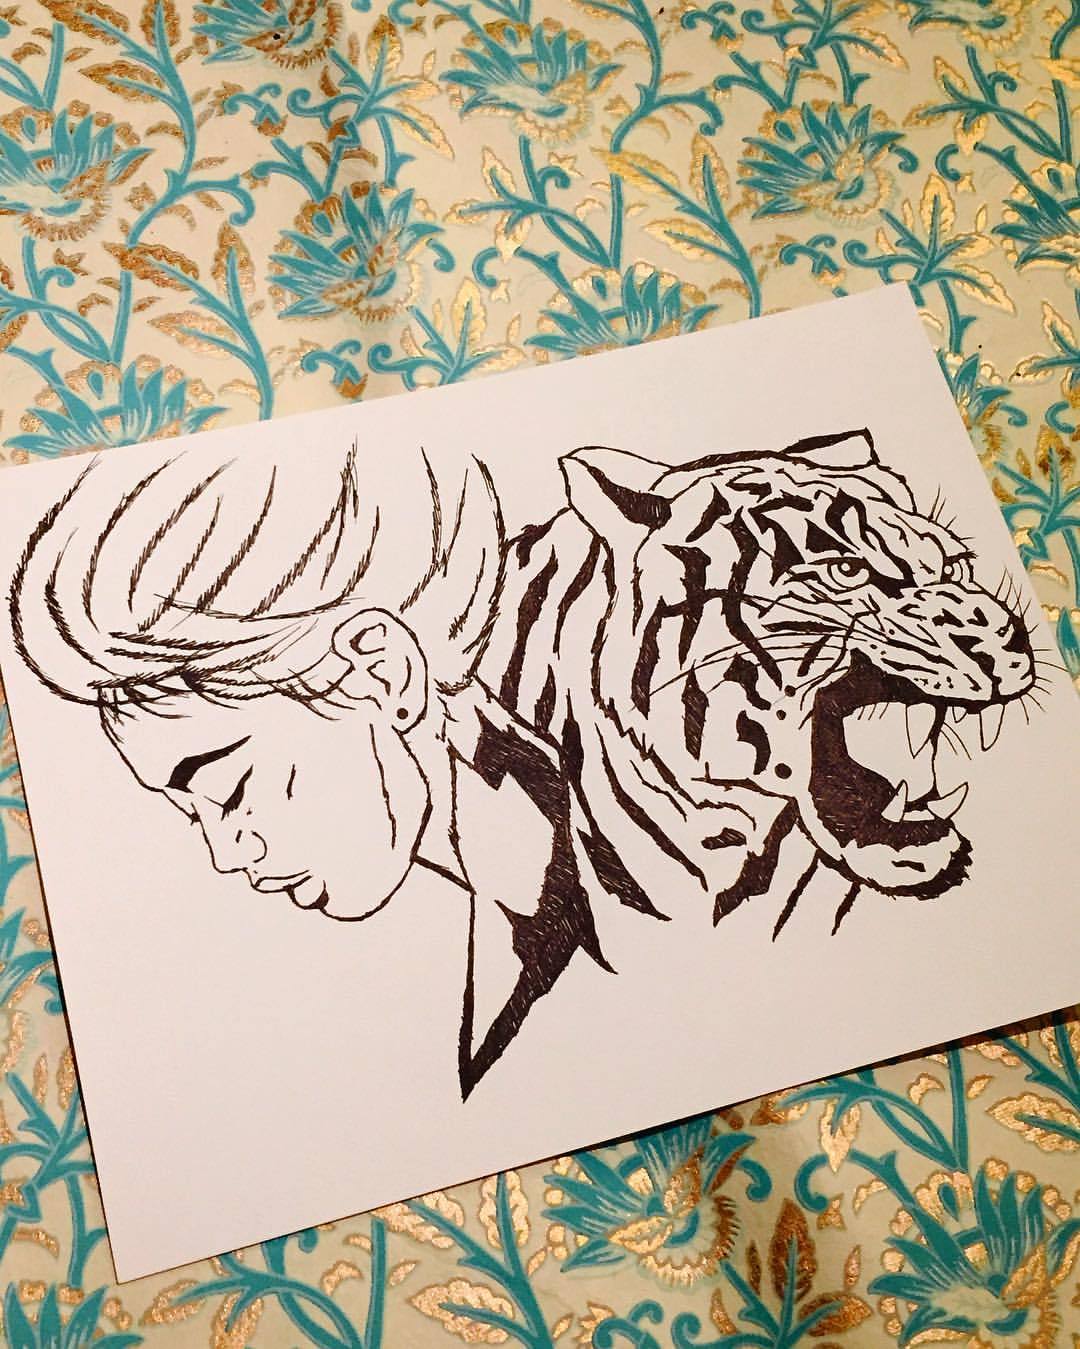 Concept drawing for a new series of stencils. Let me know what you think below!! #PaperMonster #stencil #stencils #stencilart #stencilgraffiti #graffiti #streetart #urbanart #canvas #drawing #tiger #sketch #pattern #design #art #nycart #nycgraffiti...